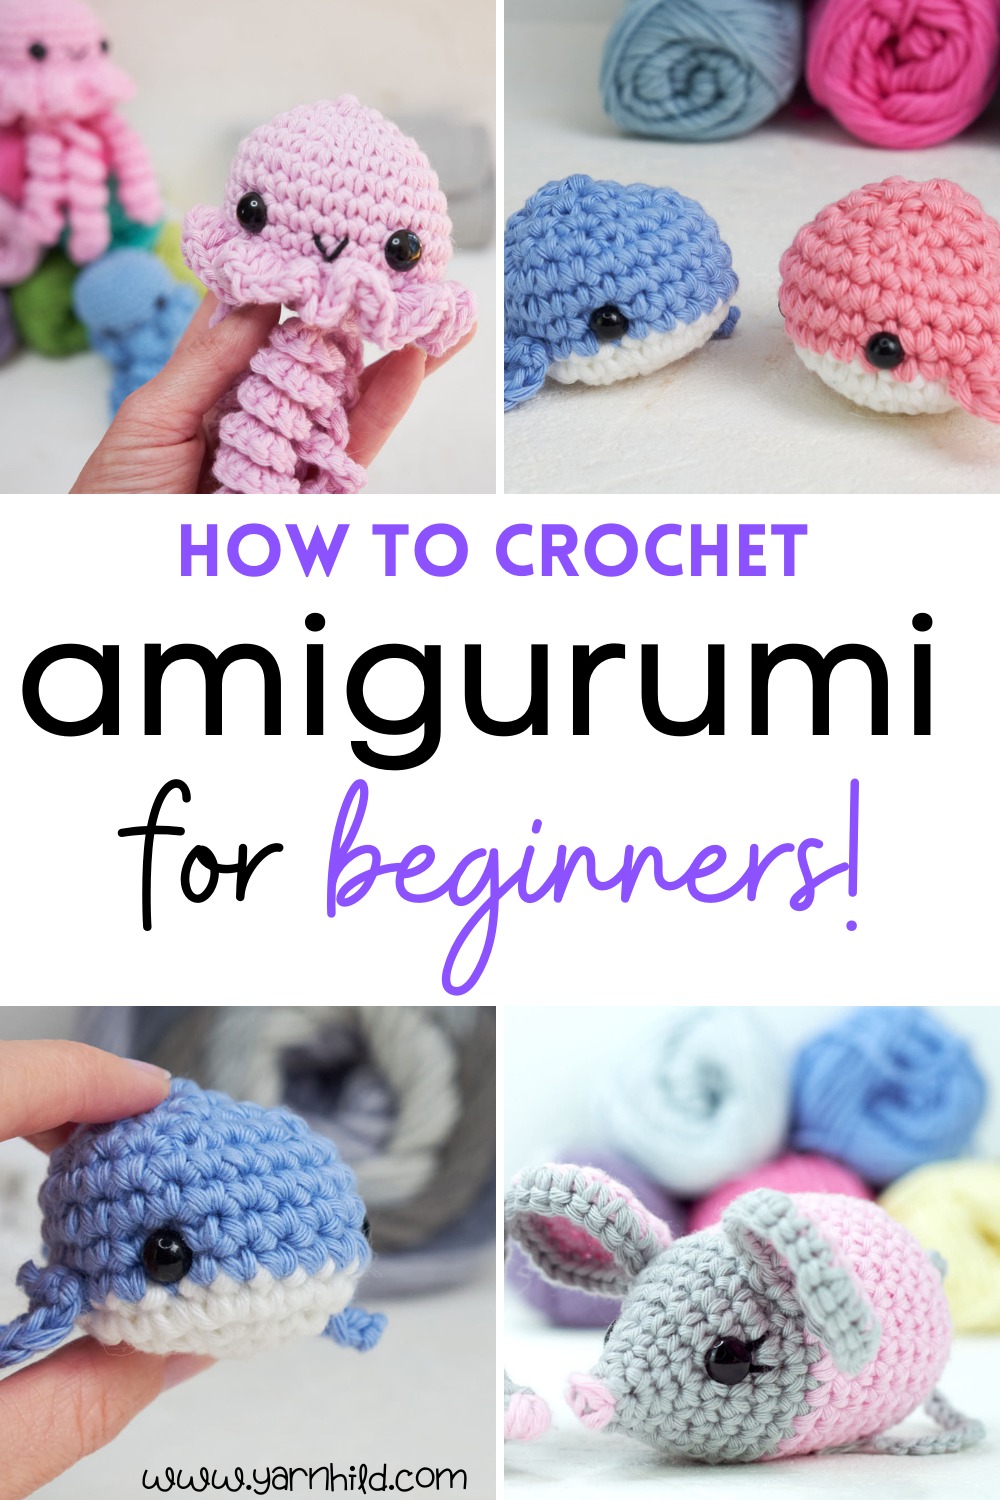 Amigurumi for Beginners - All About Ami